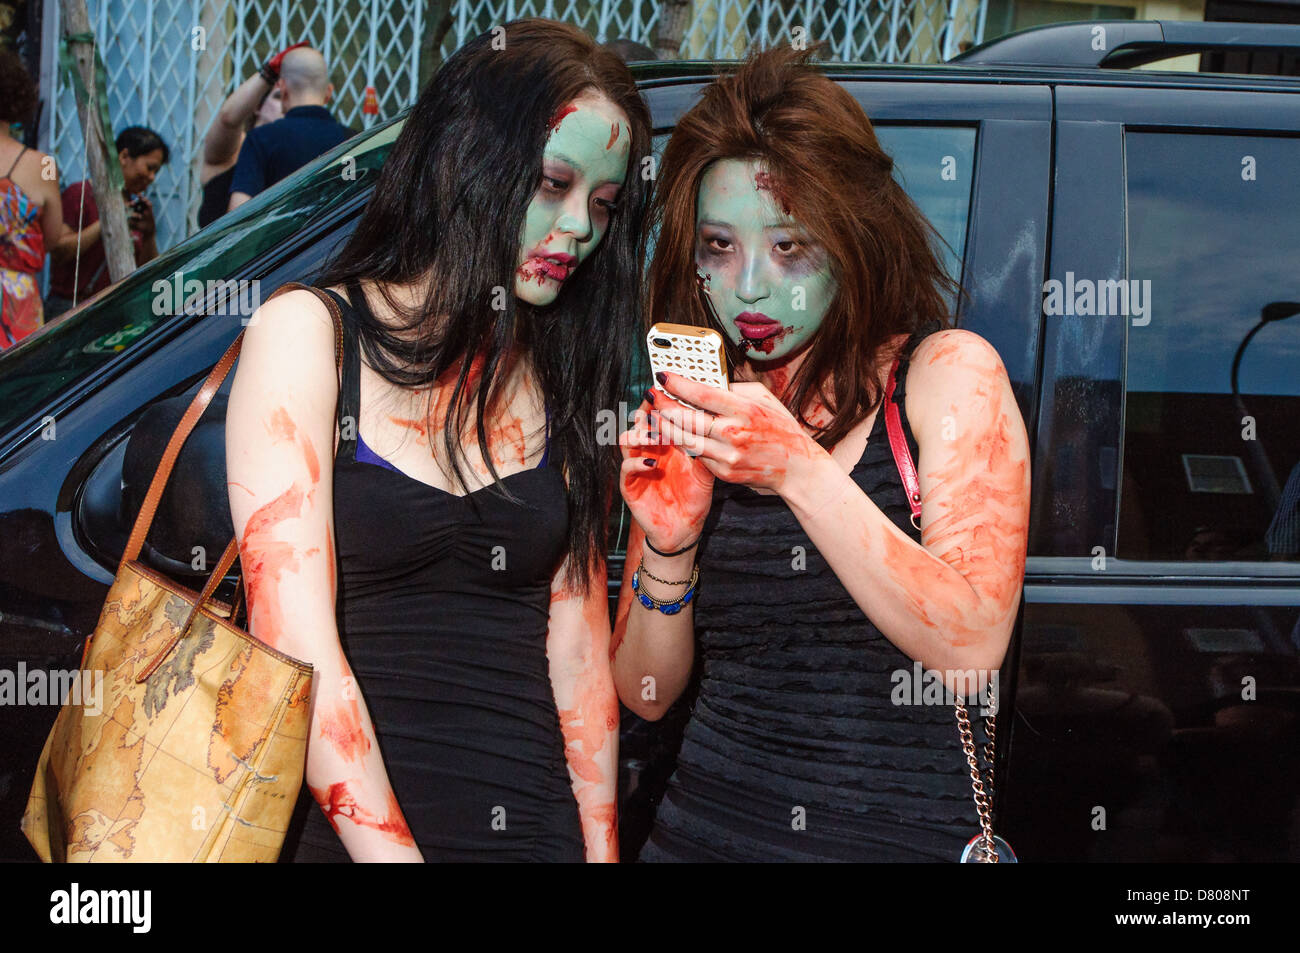 Participants of the NYC Zombie Crawl, Williamsburg. May 27, 2012 Stock Photo